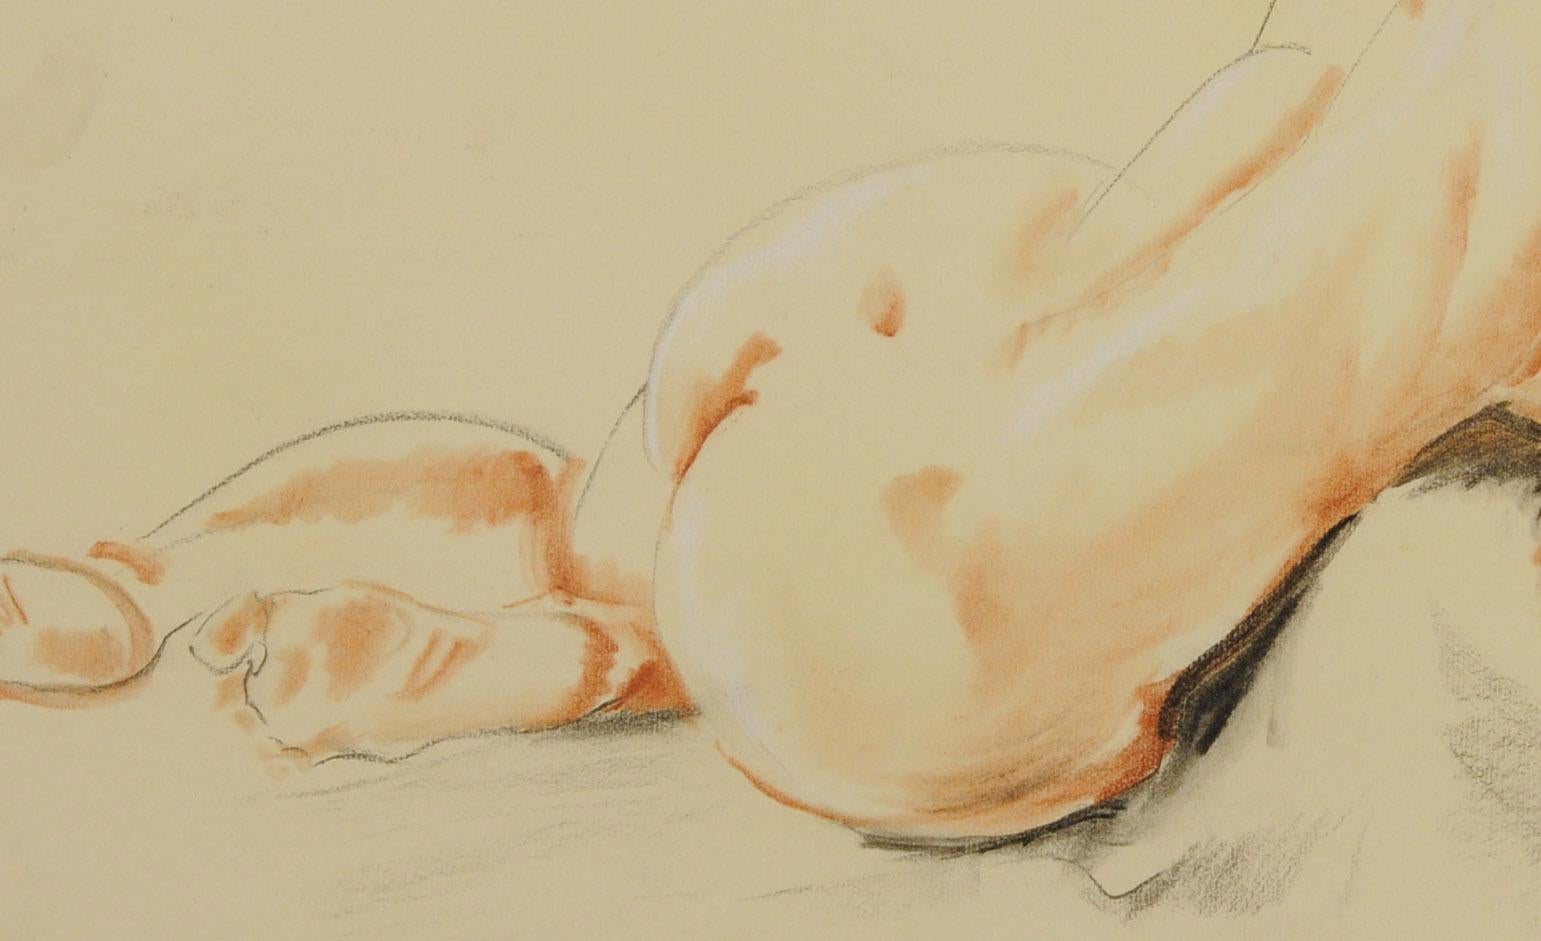 Reclining Female Nude
Charcoal and colored chalks with white highlights on tan laid paper, c. 1948
Signed and monogrammed by the artist lower right
      (see photo)
A masterpiece drawing demonstrating the foreshortening of the model's legs.
From